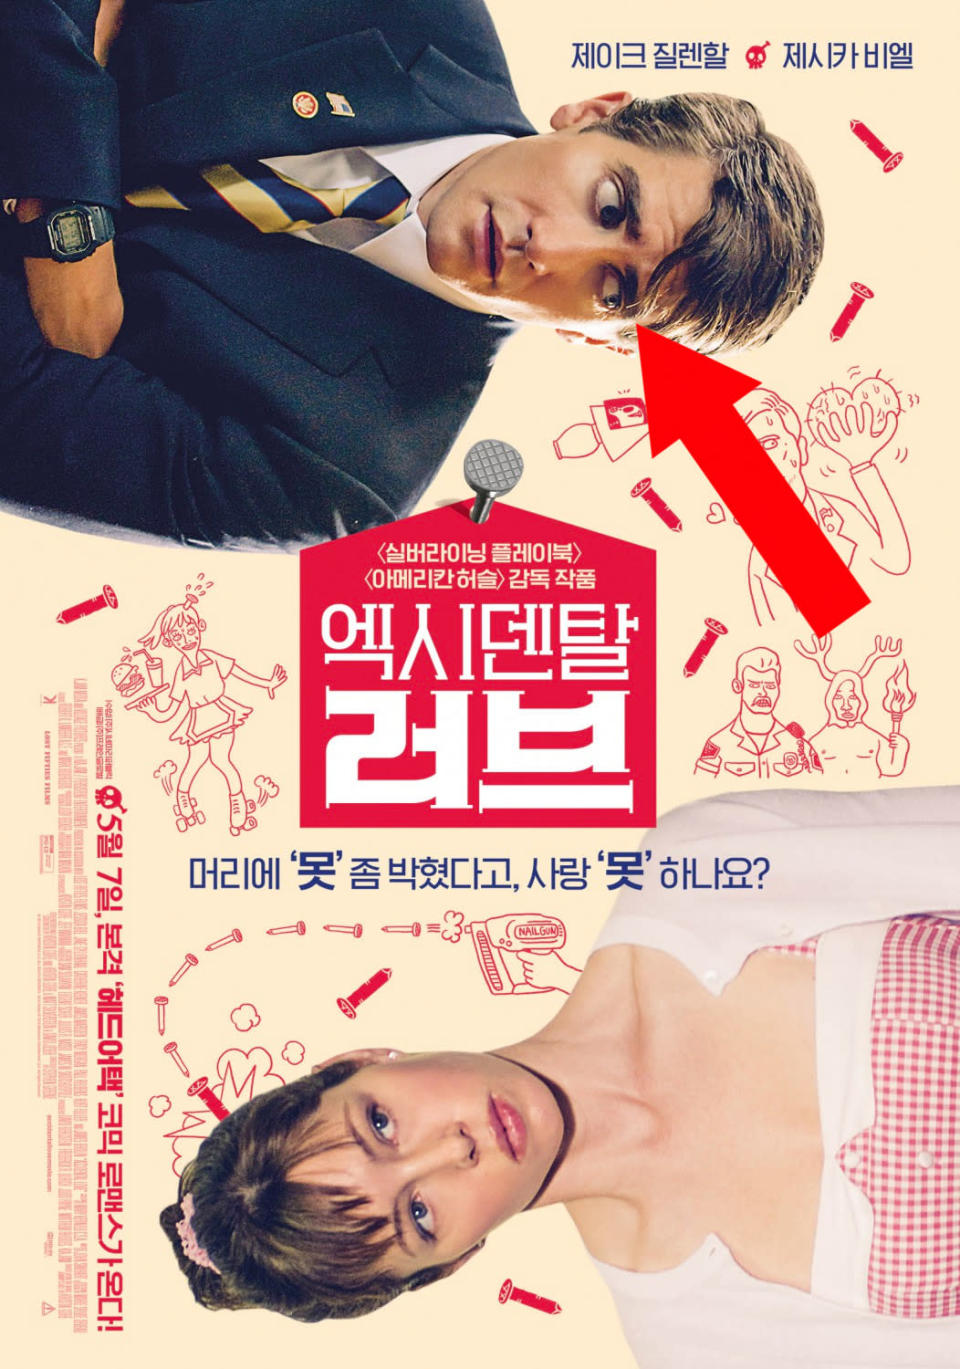 Accidental Love: As we know from 'Nightcrawler’, there’s something about Jake Gyllenhaal’s piercing, soul-searching eyes. But this looks like someone’s turned him into a Manga character for the Japanese poster for 'Accidental Love’. Freaky.